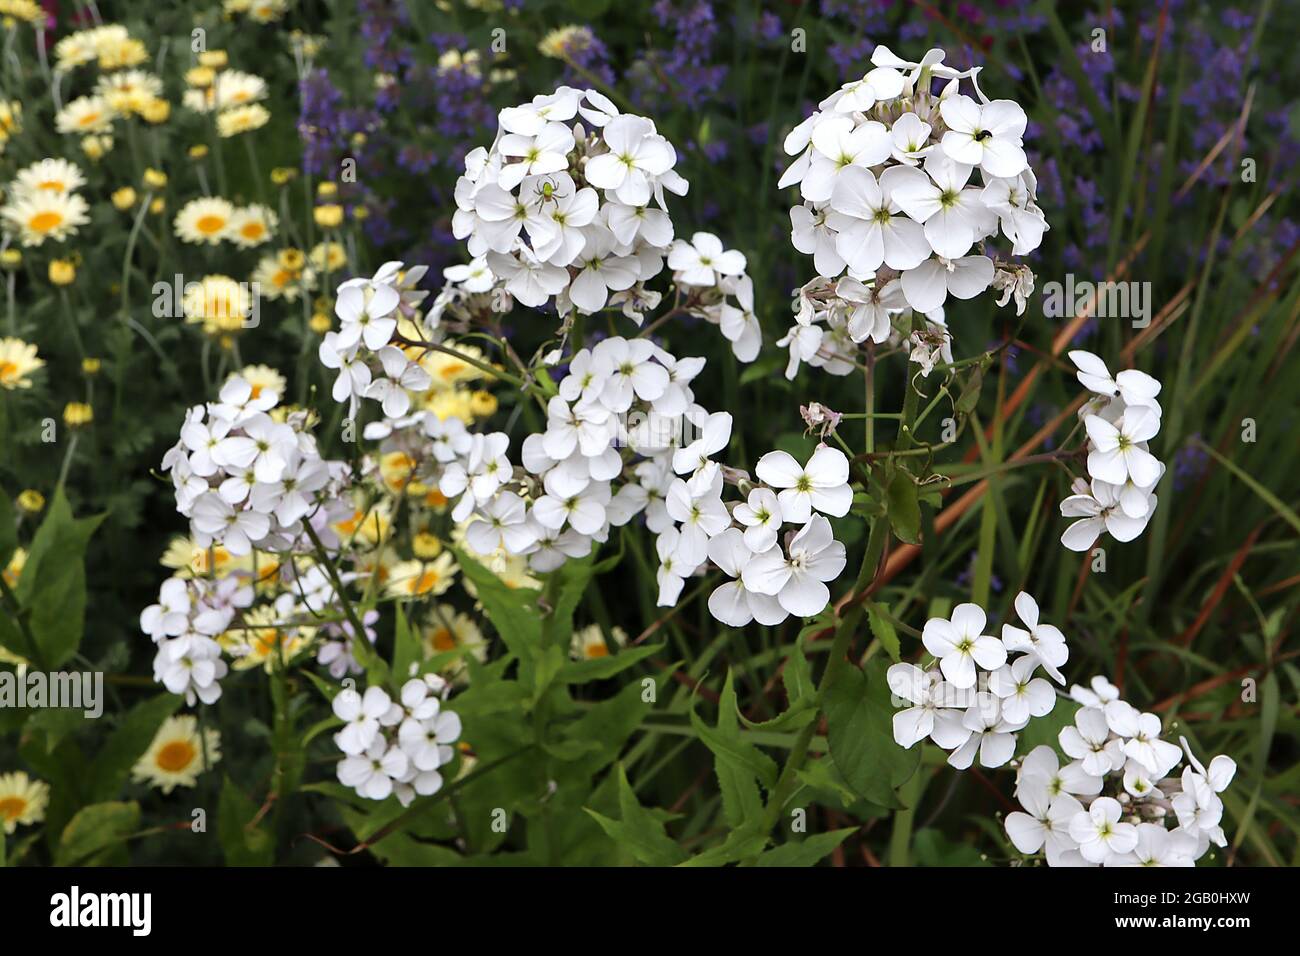 Hesperis matronalis var. albiflora dames violet – domed clusters of white flowers and dark green lance-shaped leaves on tall stems,  June, England, UK Stock Photo